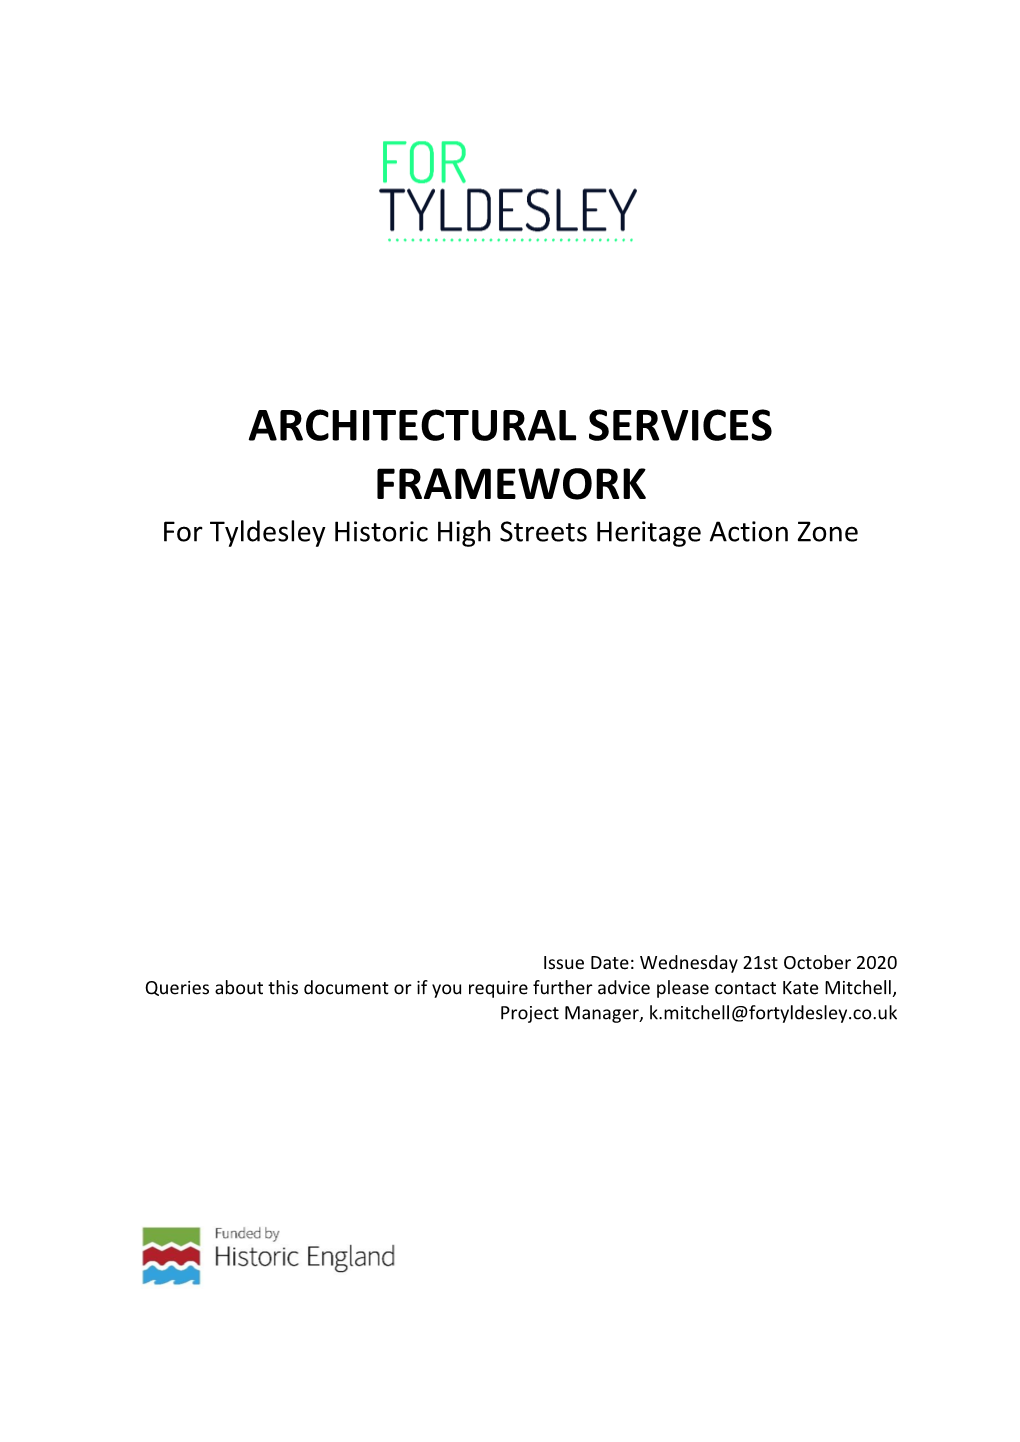 ARCHITECTURAL SERVICES FRAMEWORK for Tyldesley Historic High Streets Heritage Action Zone